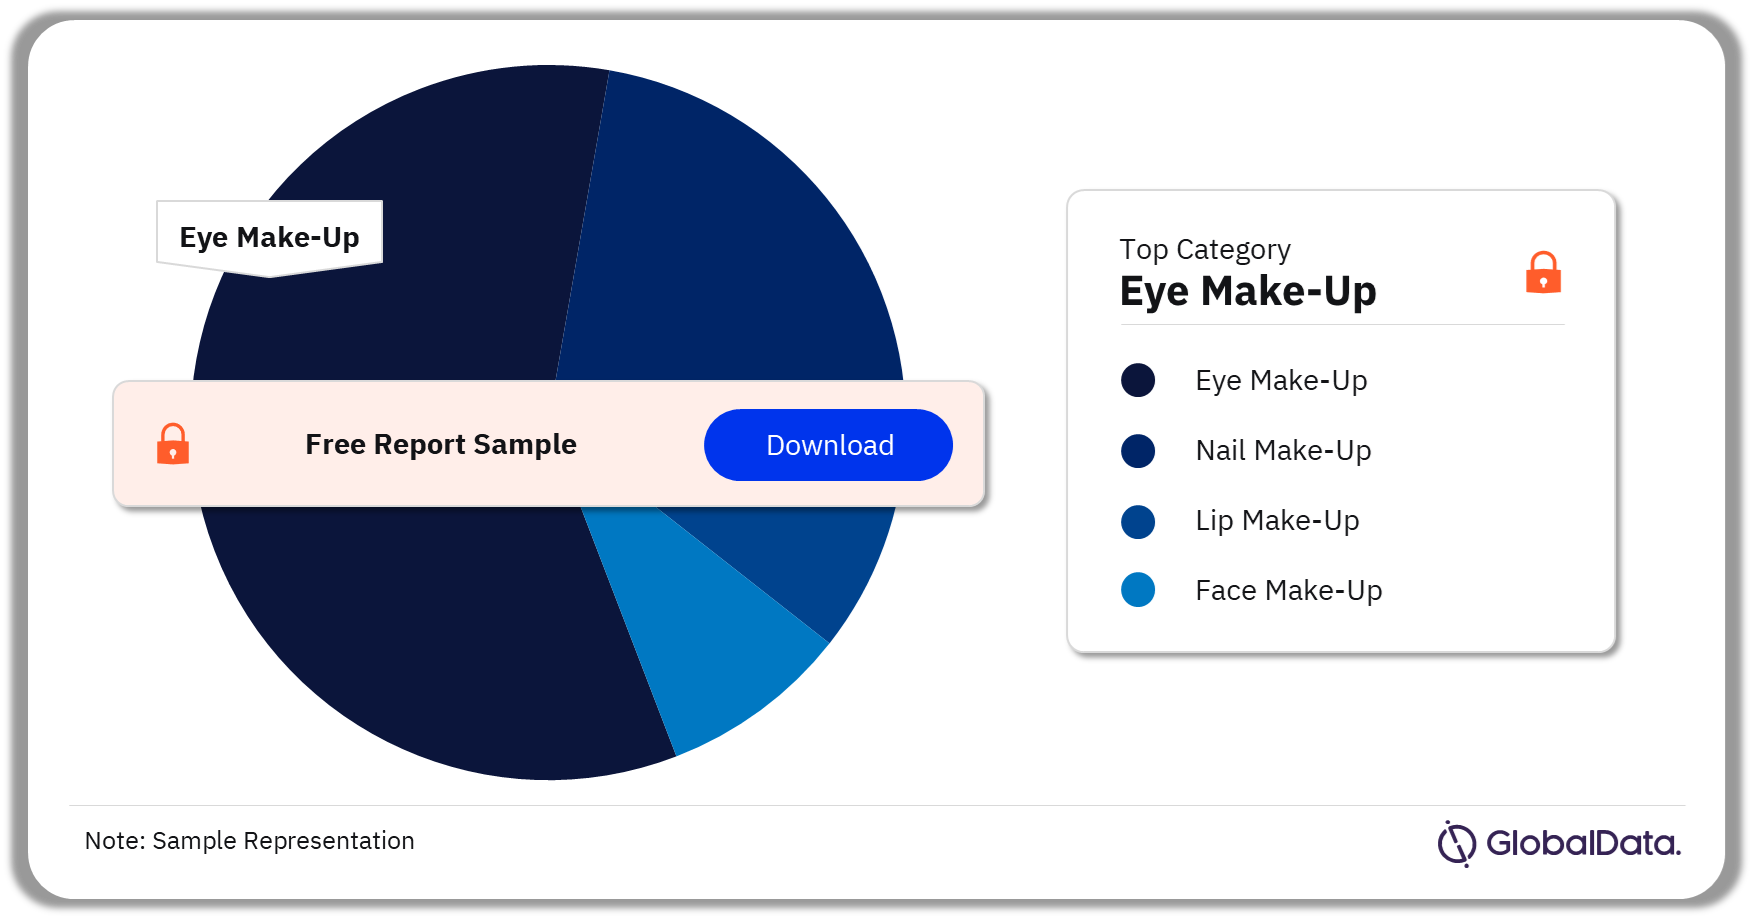 Netherlands Make-up Market Analysis, by Categories, 2021 (%)